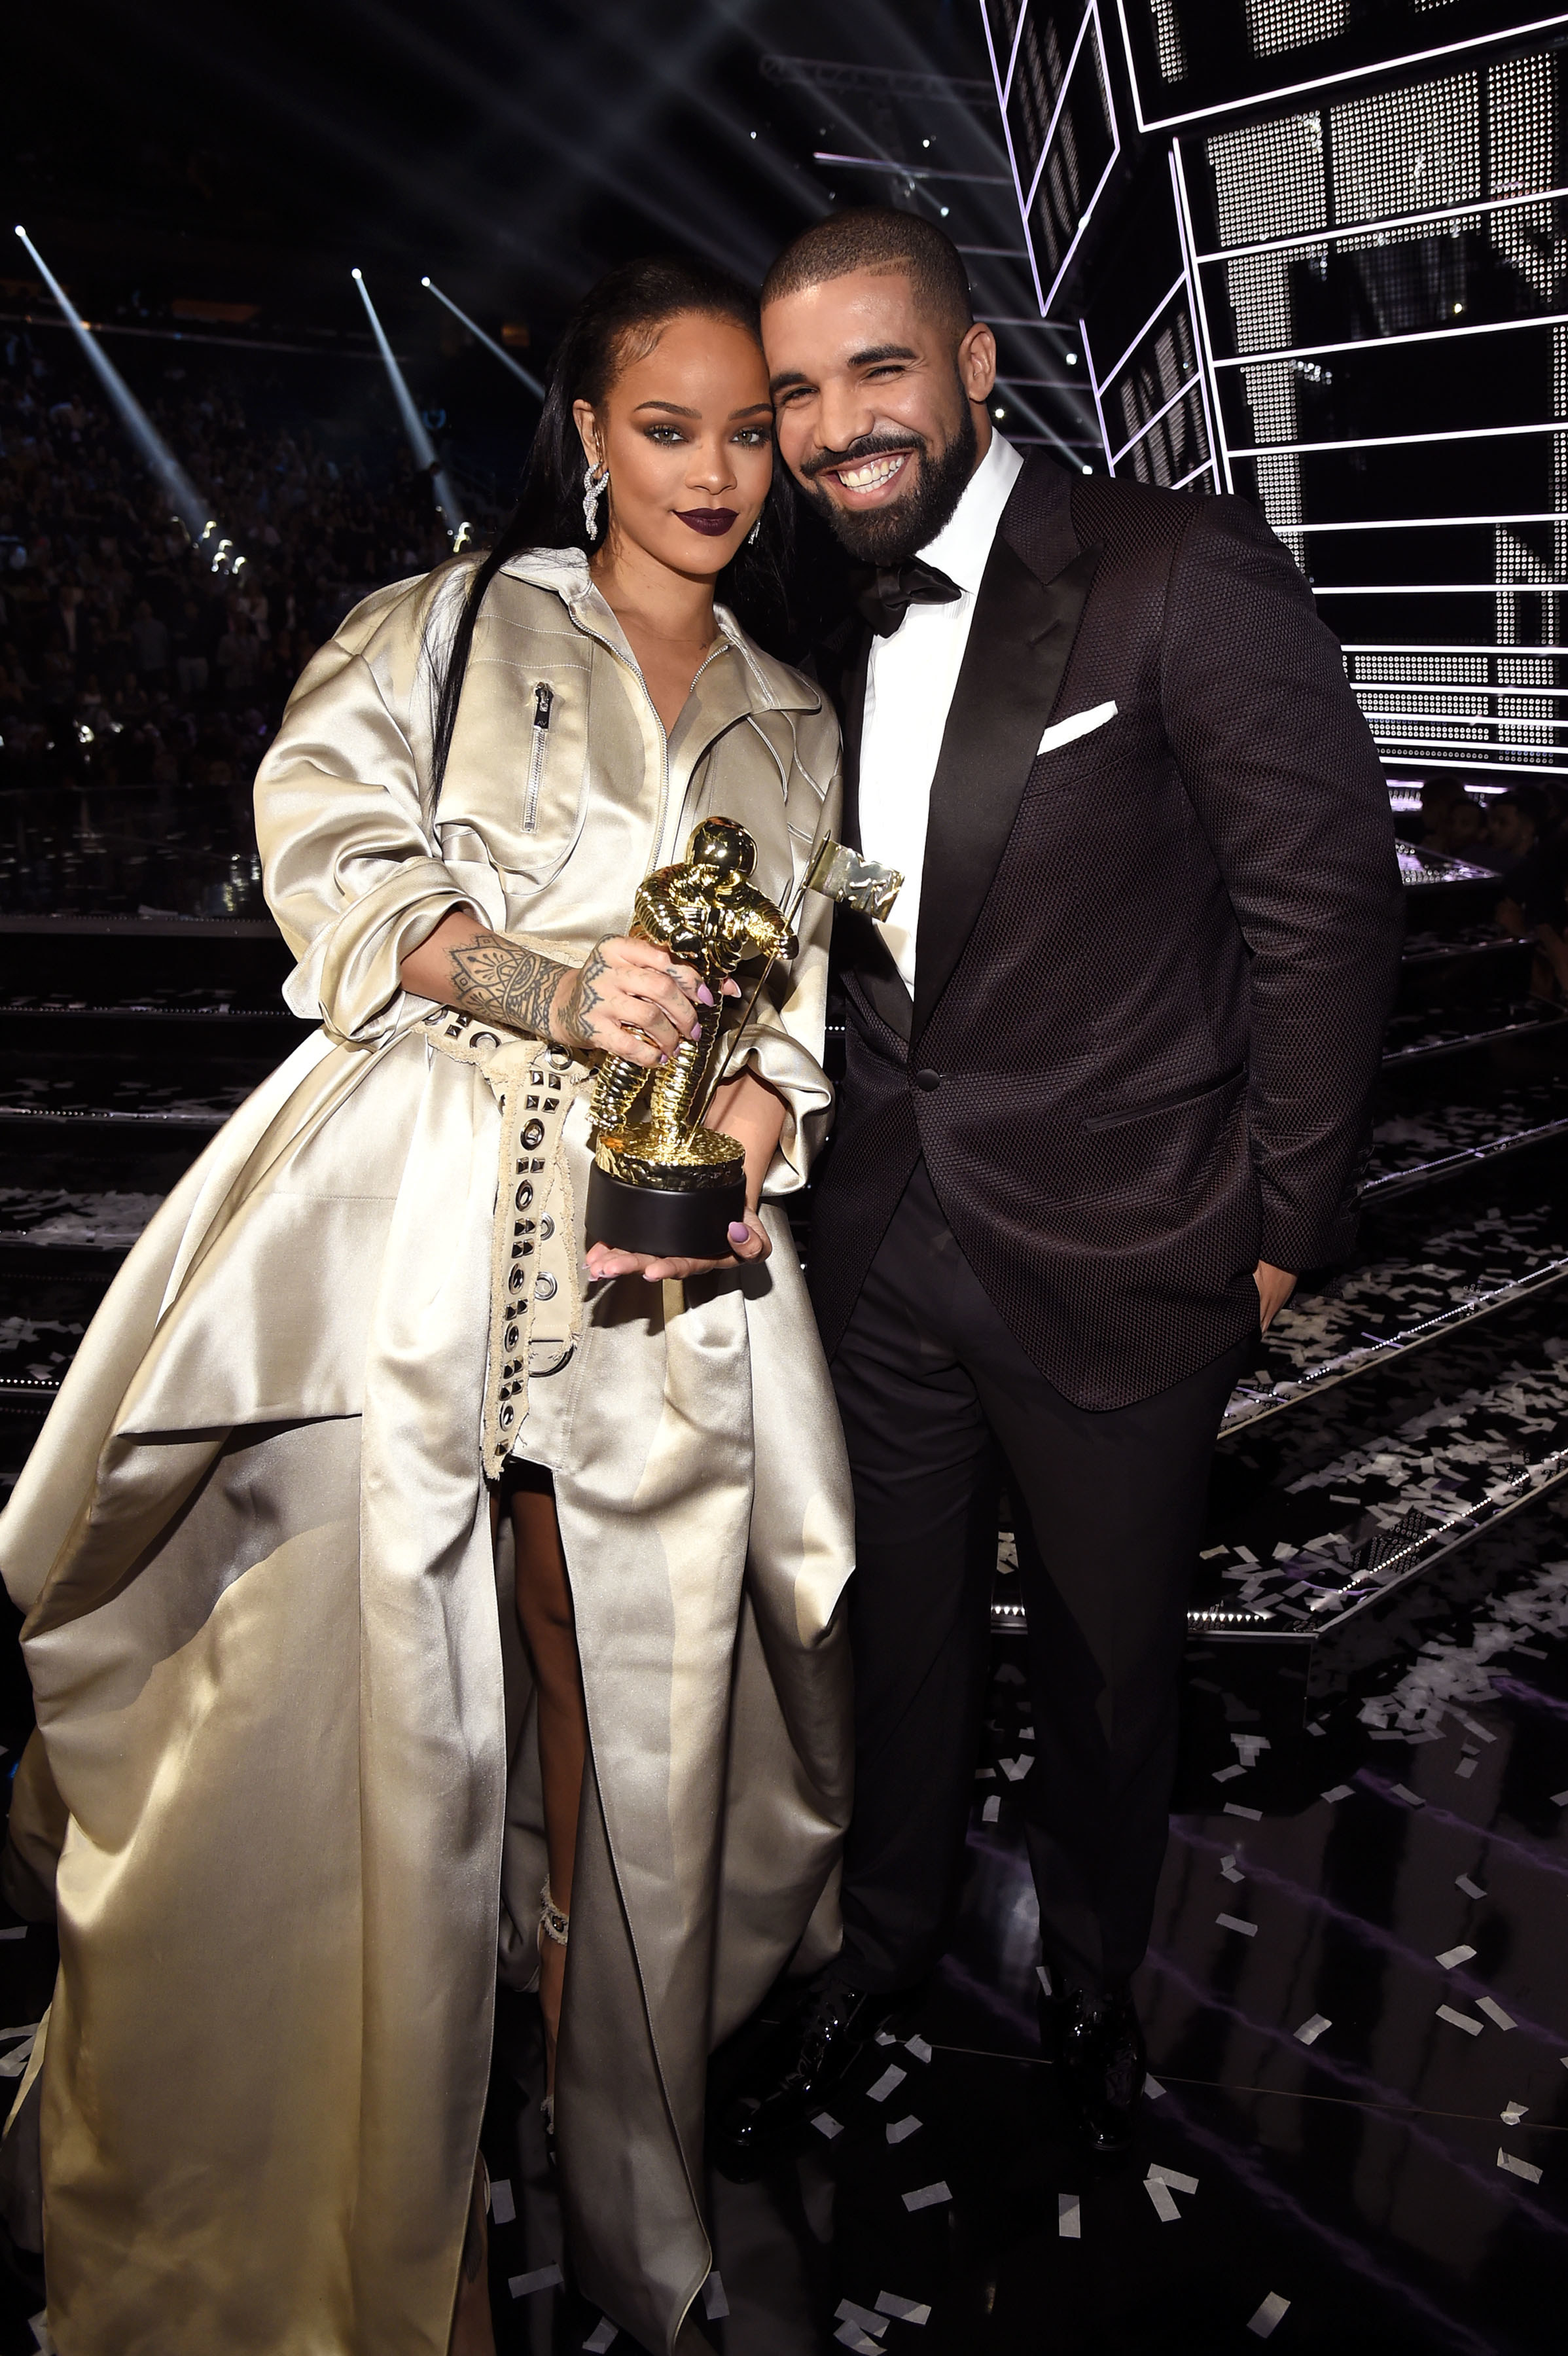 Rihanna and Drake are seen onstage at the 2016 MTV Video Music Awards